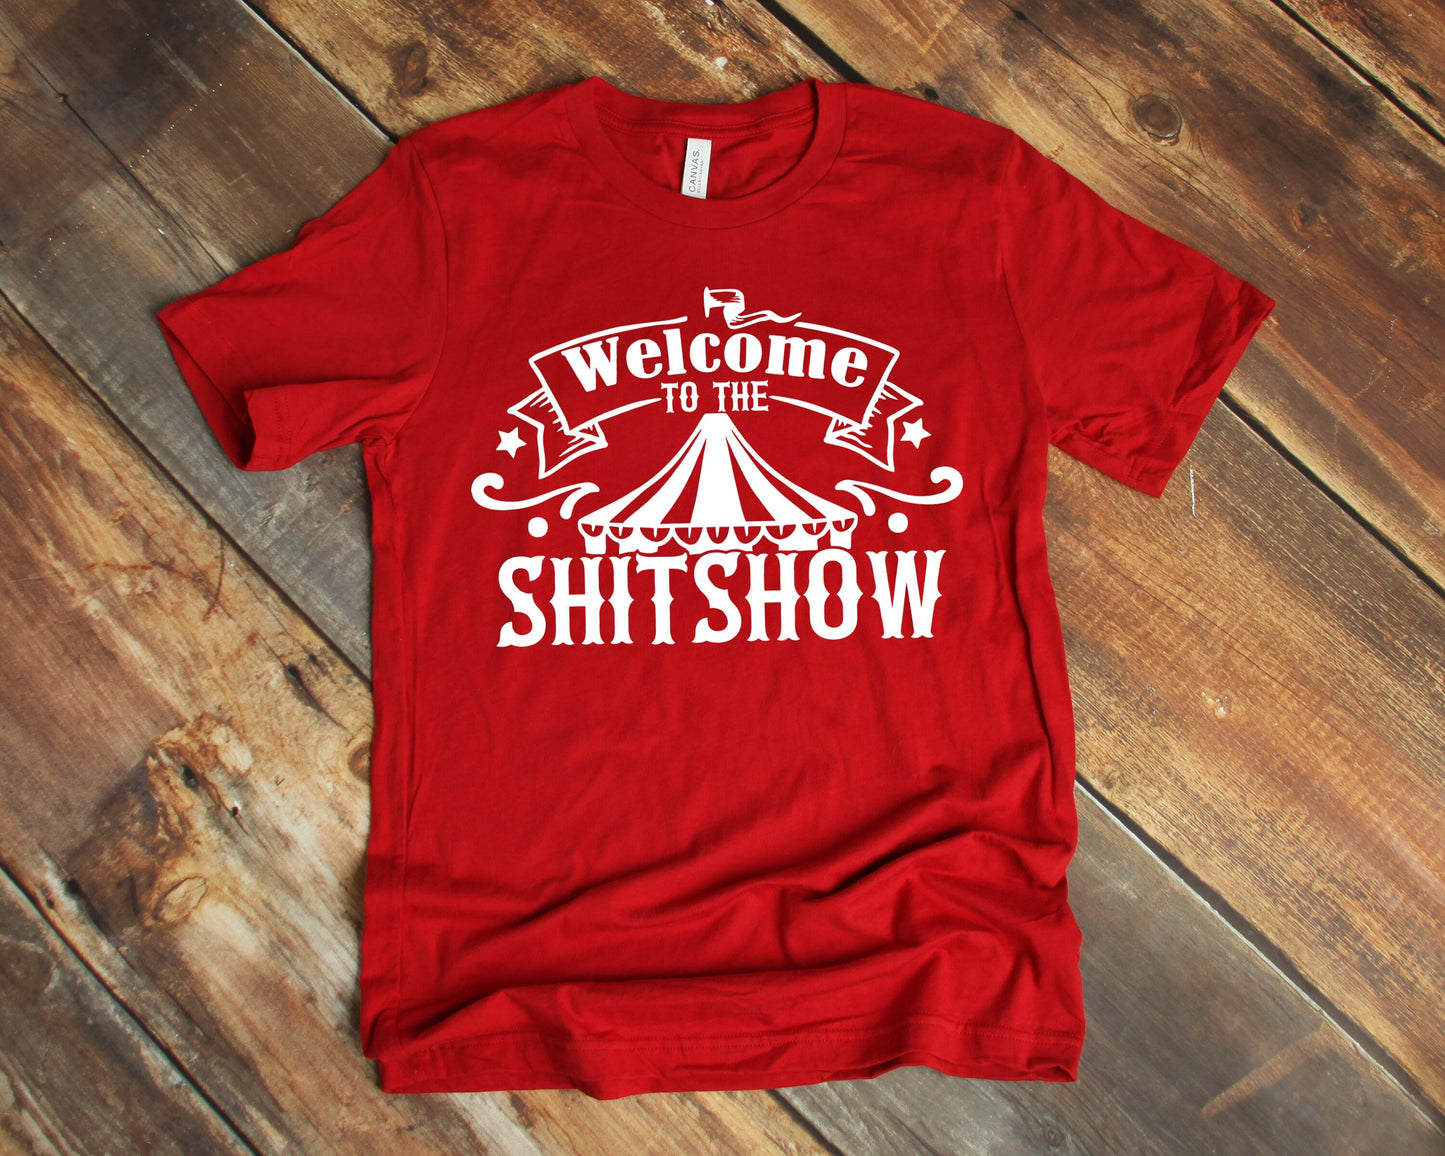 Welcome to the Shitshow unisex t-shirt - funny t-shirt - shirt for mom - shirt for dad - funny gifts - novelty t-shirt - offensive t-shirts